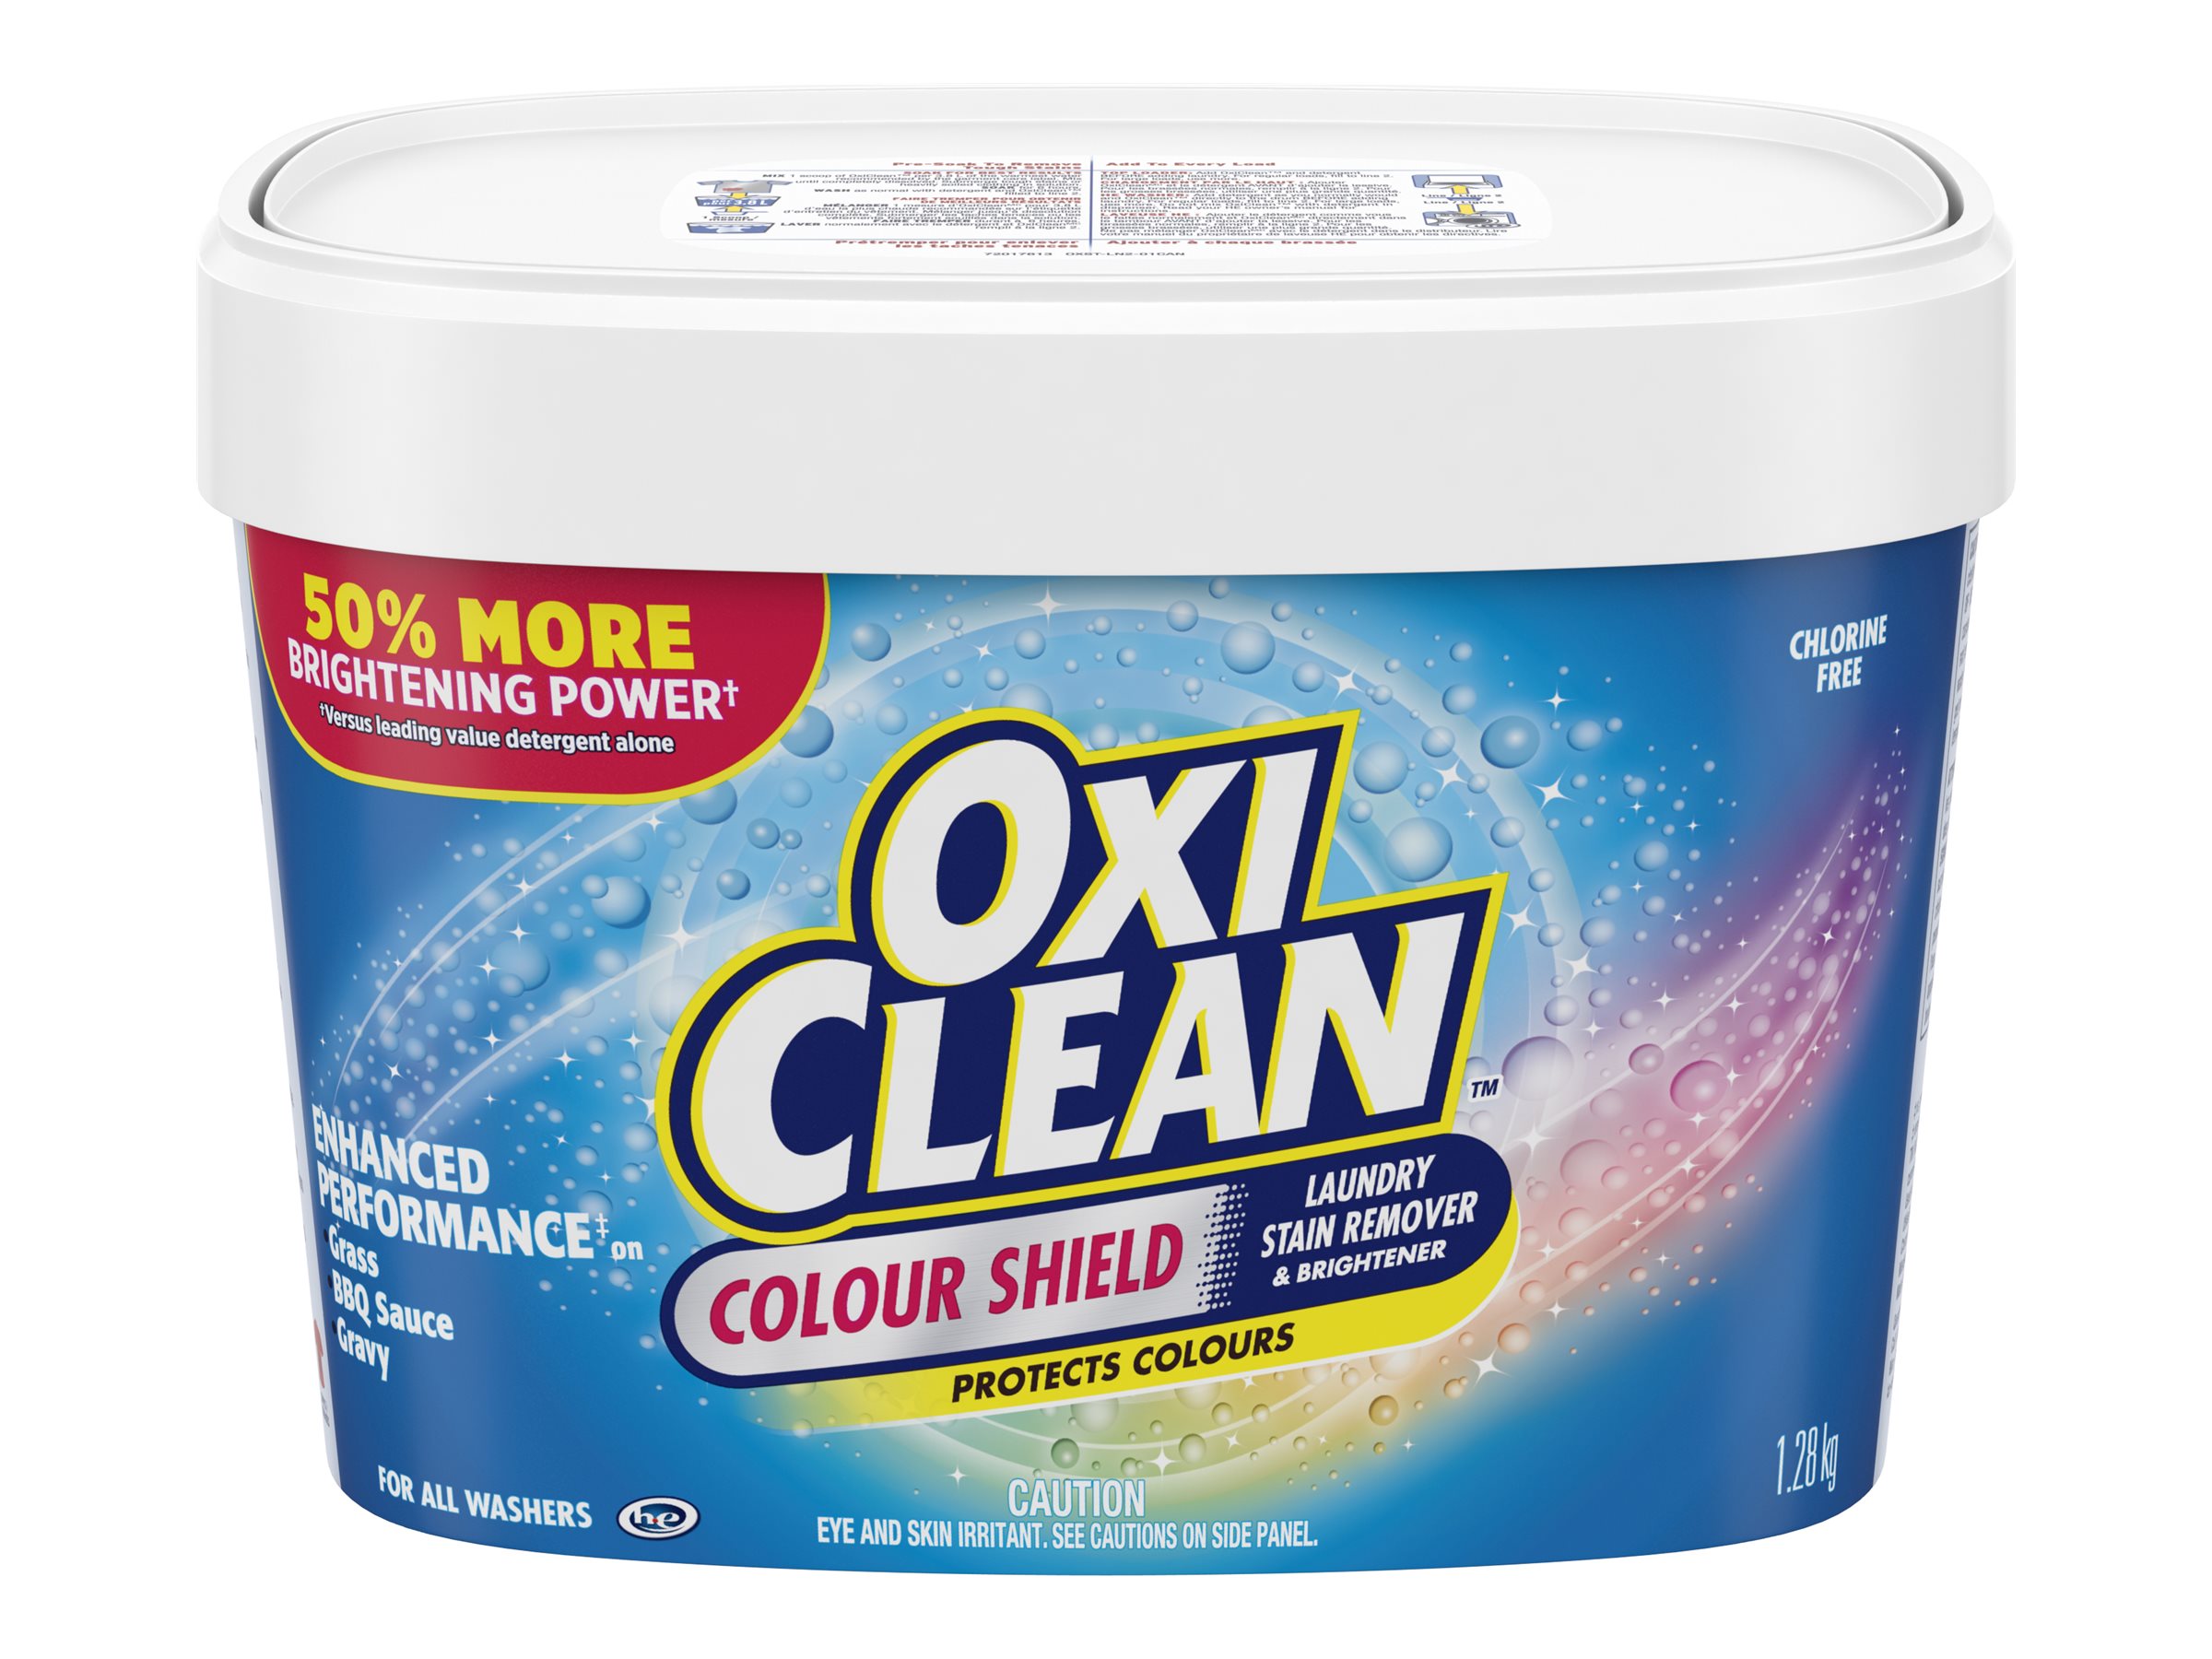 OxiClean Colour Shield Laundry Stain Remover - 1.28kg